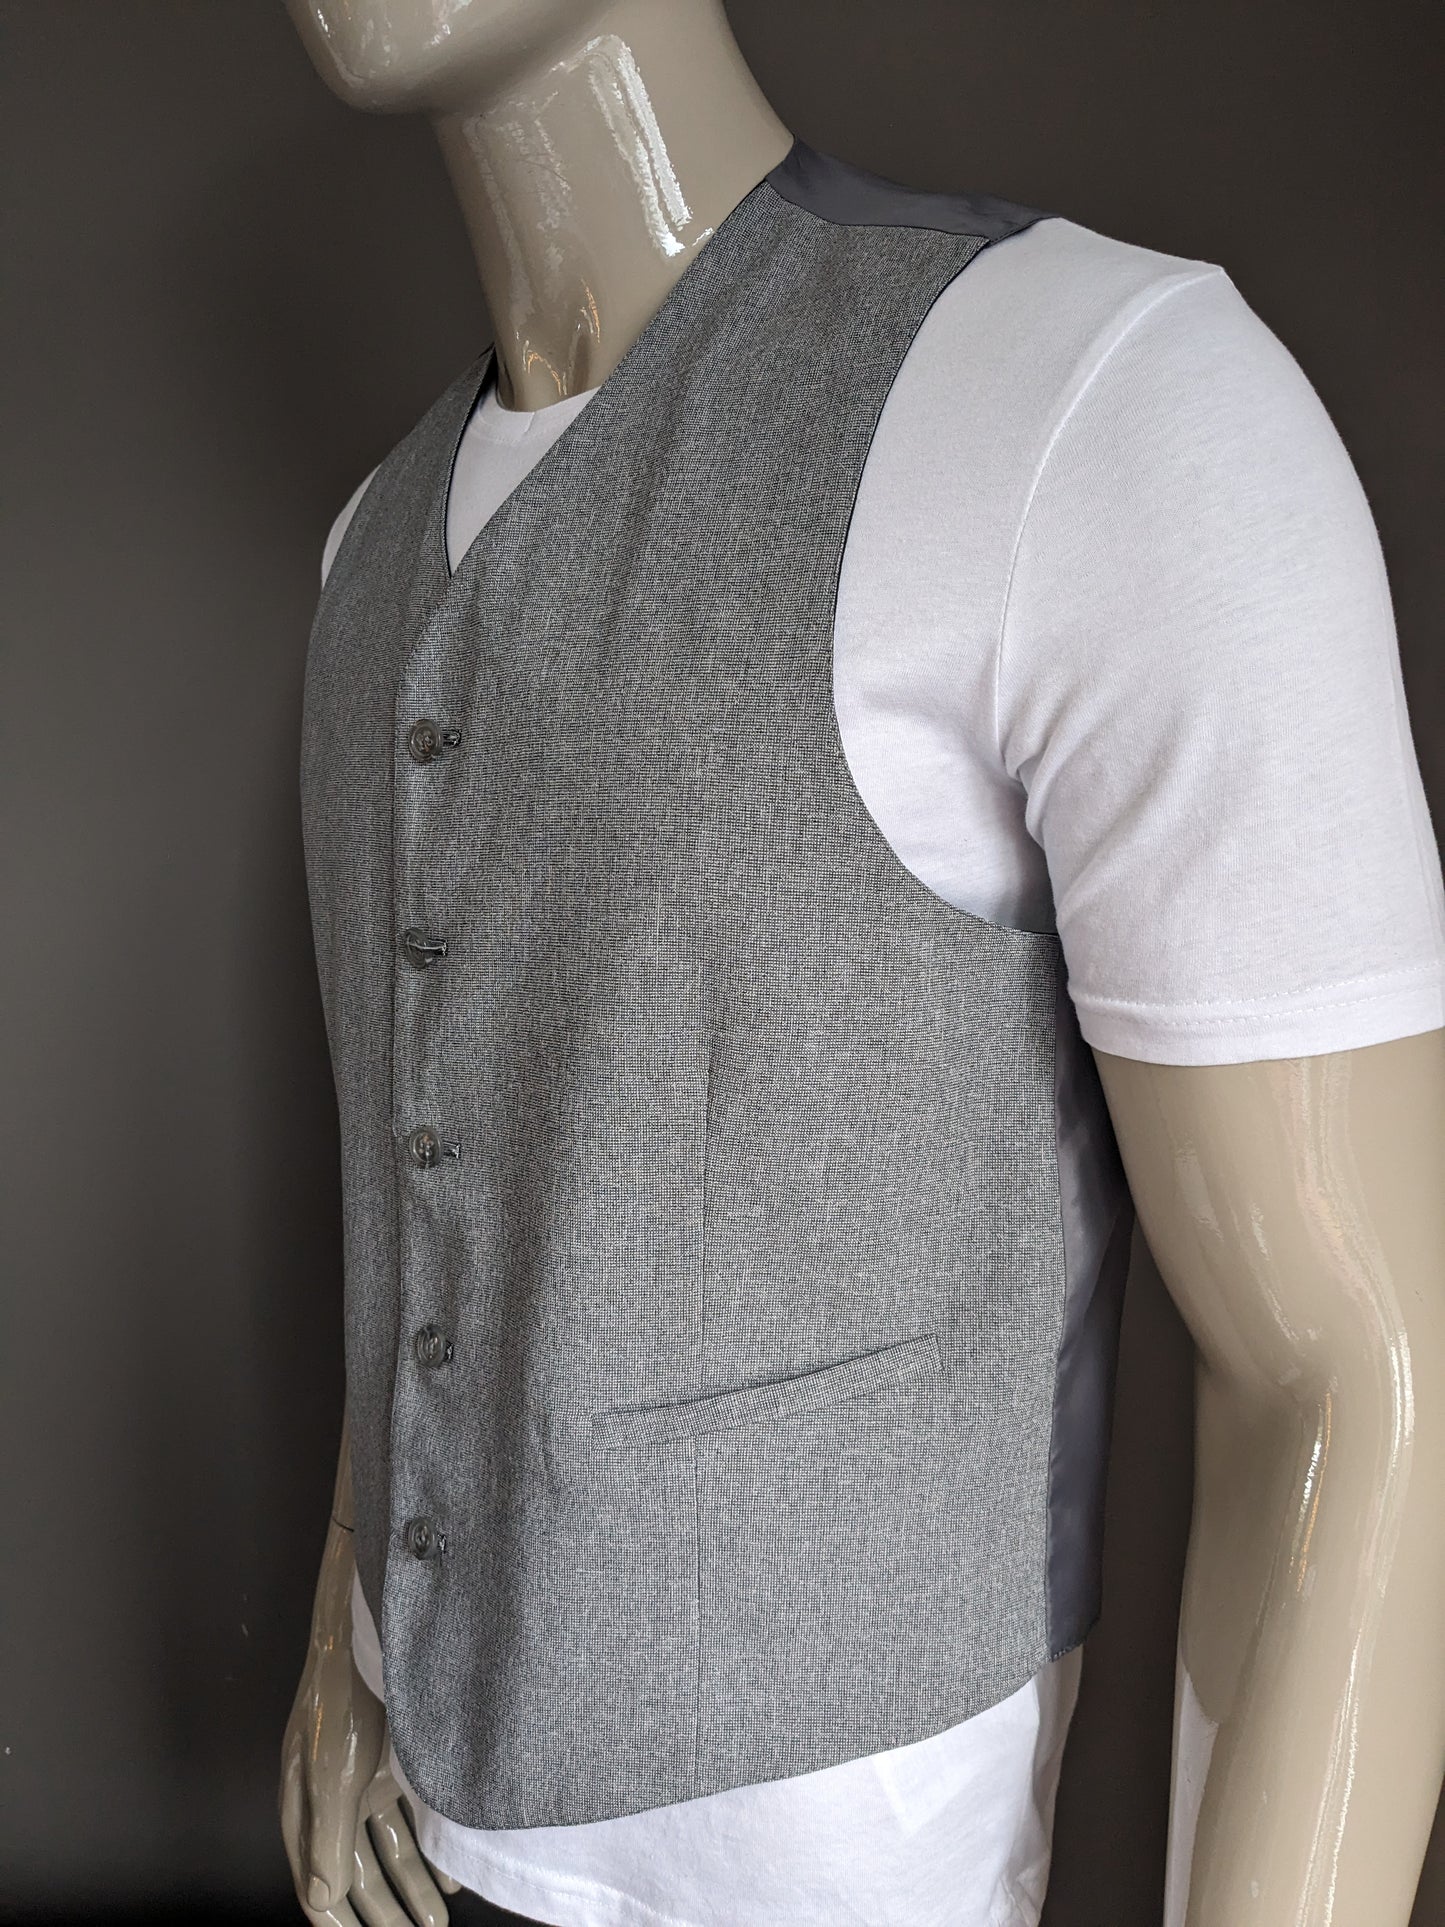 Double -sided waistcoat. A black and gray copy. Size 52 / L.